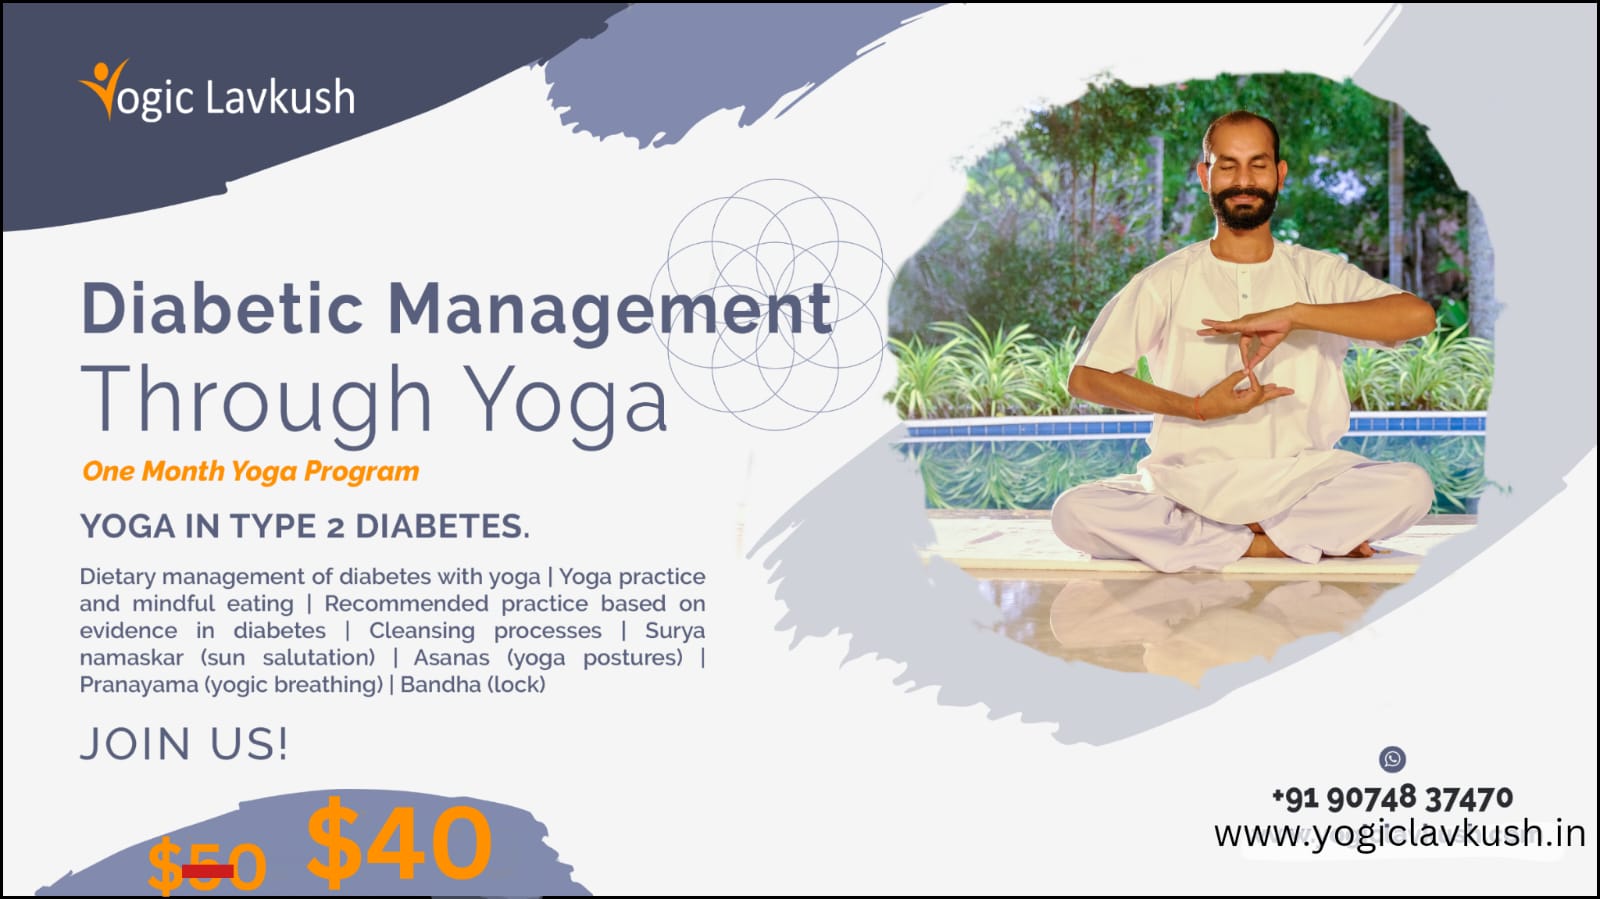 The Benefits of Online Yoga for Diabetic Management with Yogiclavkush